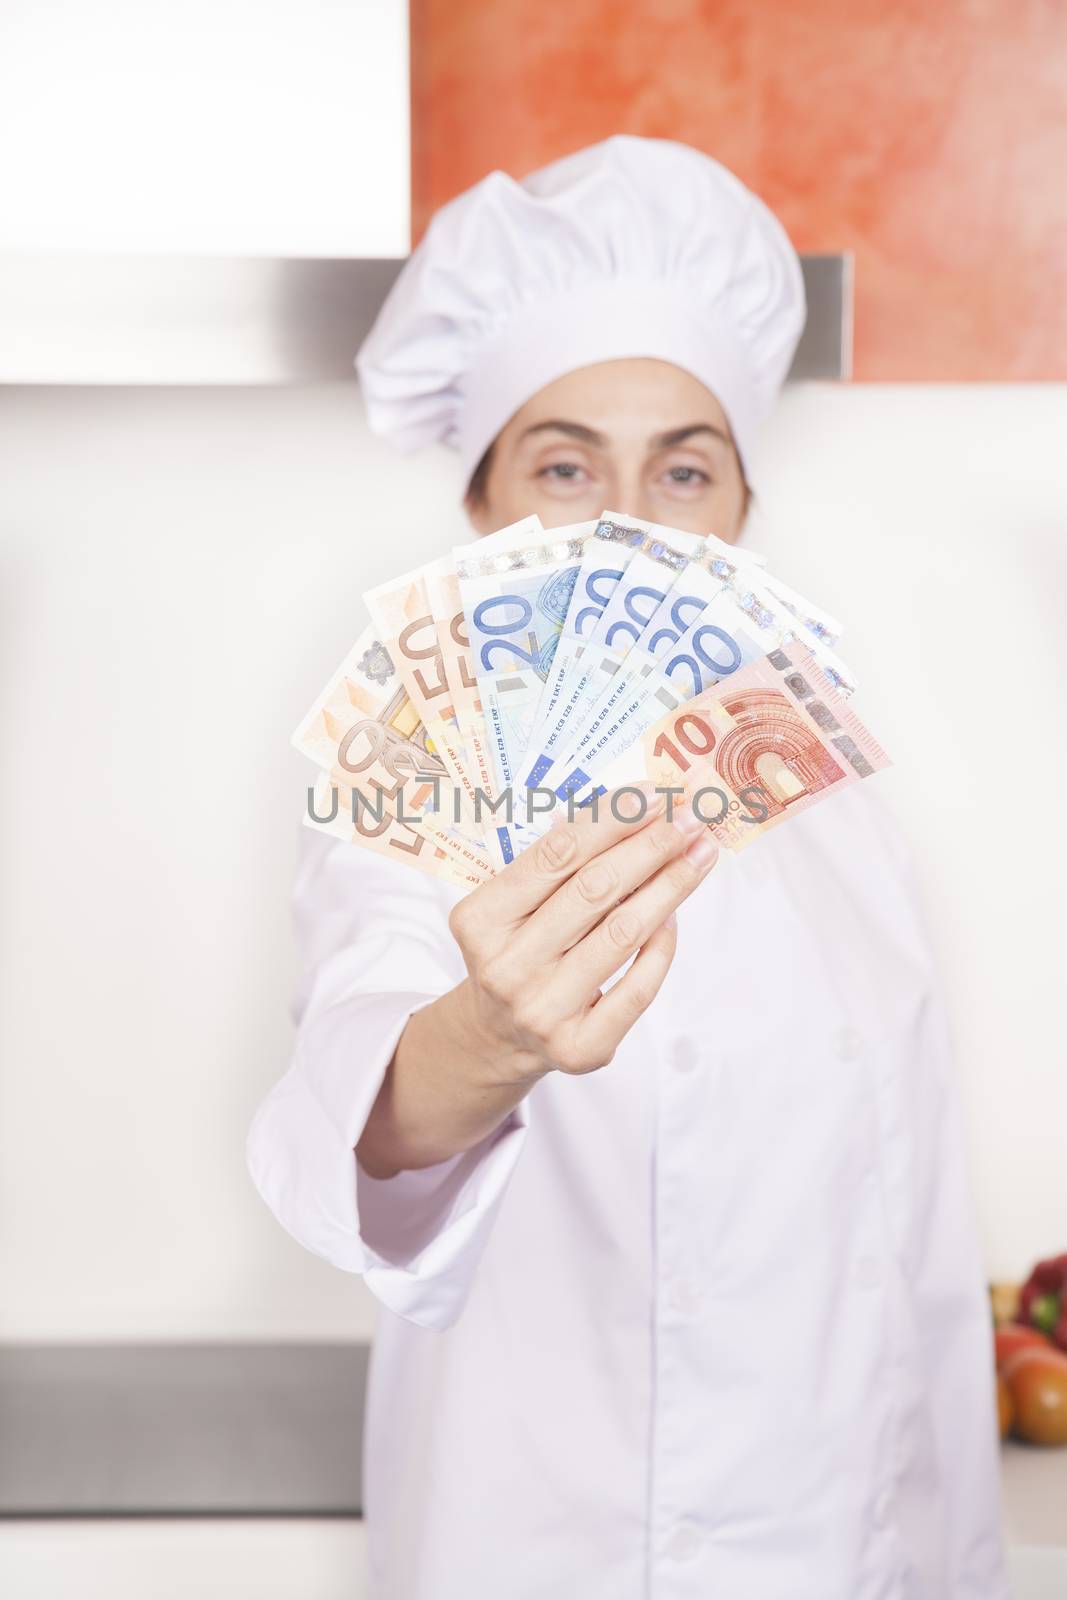 wad of fifty twenty and ten Euro banknotes wad in hands of brunette happy chef woman with professional jacket and hat in white and orange kitchen